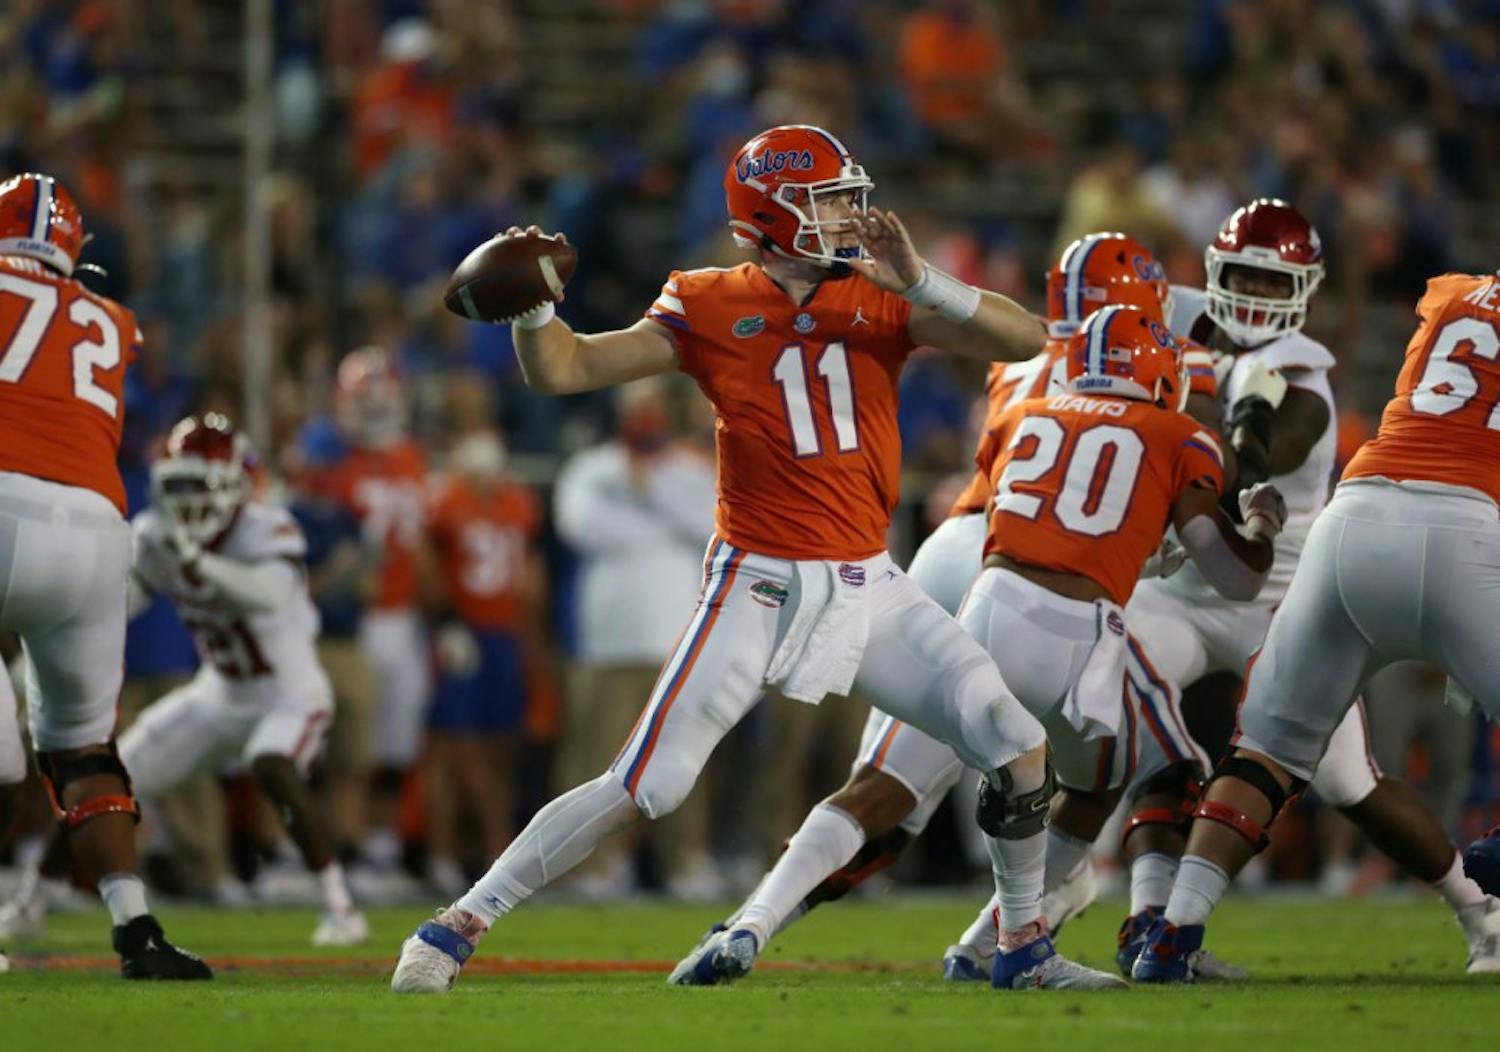 Gators quarterback Kyle Trask winds up to throw the football during Florida’s game versus Arkansas at Ben Hill Griffin Stadium on Nov. 14. After Saturday night’s performance, many media members and Gators fans see Trask as the frontrunner for the 2020 Heisman Trophy award.